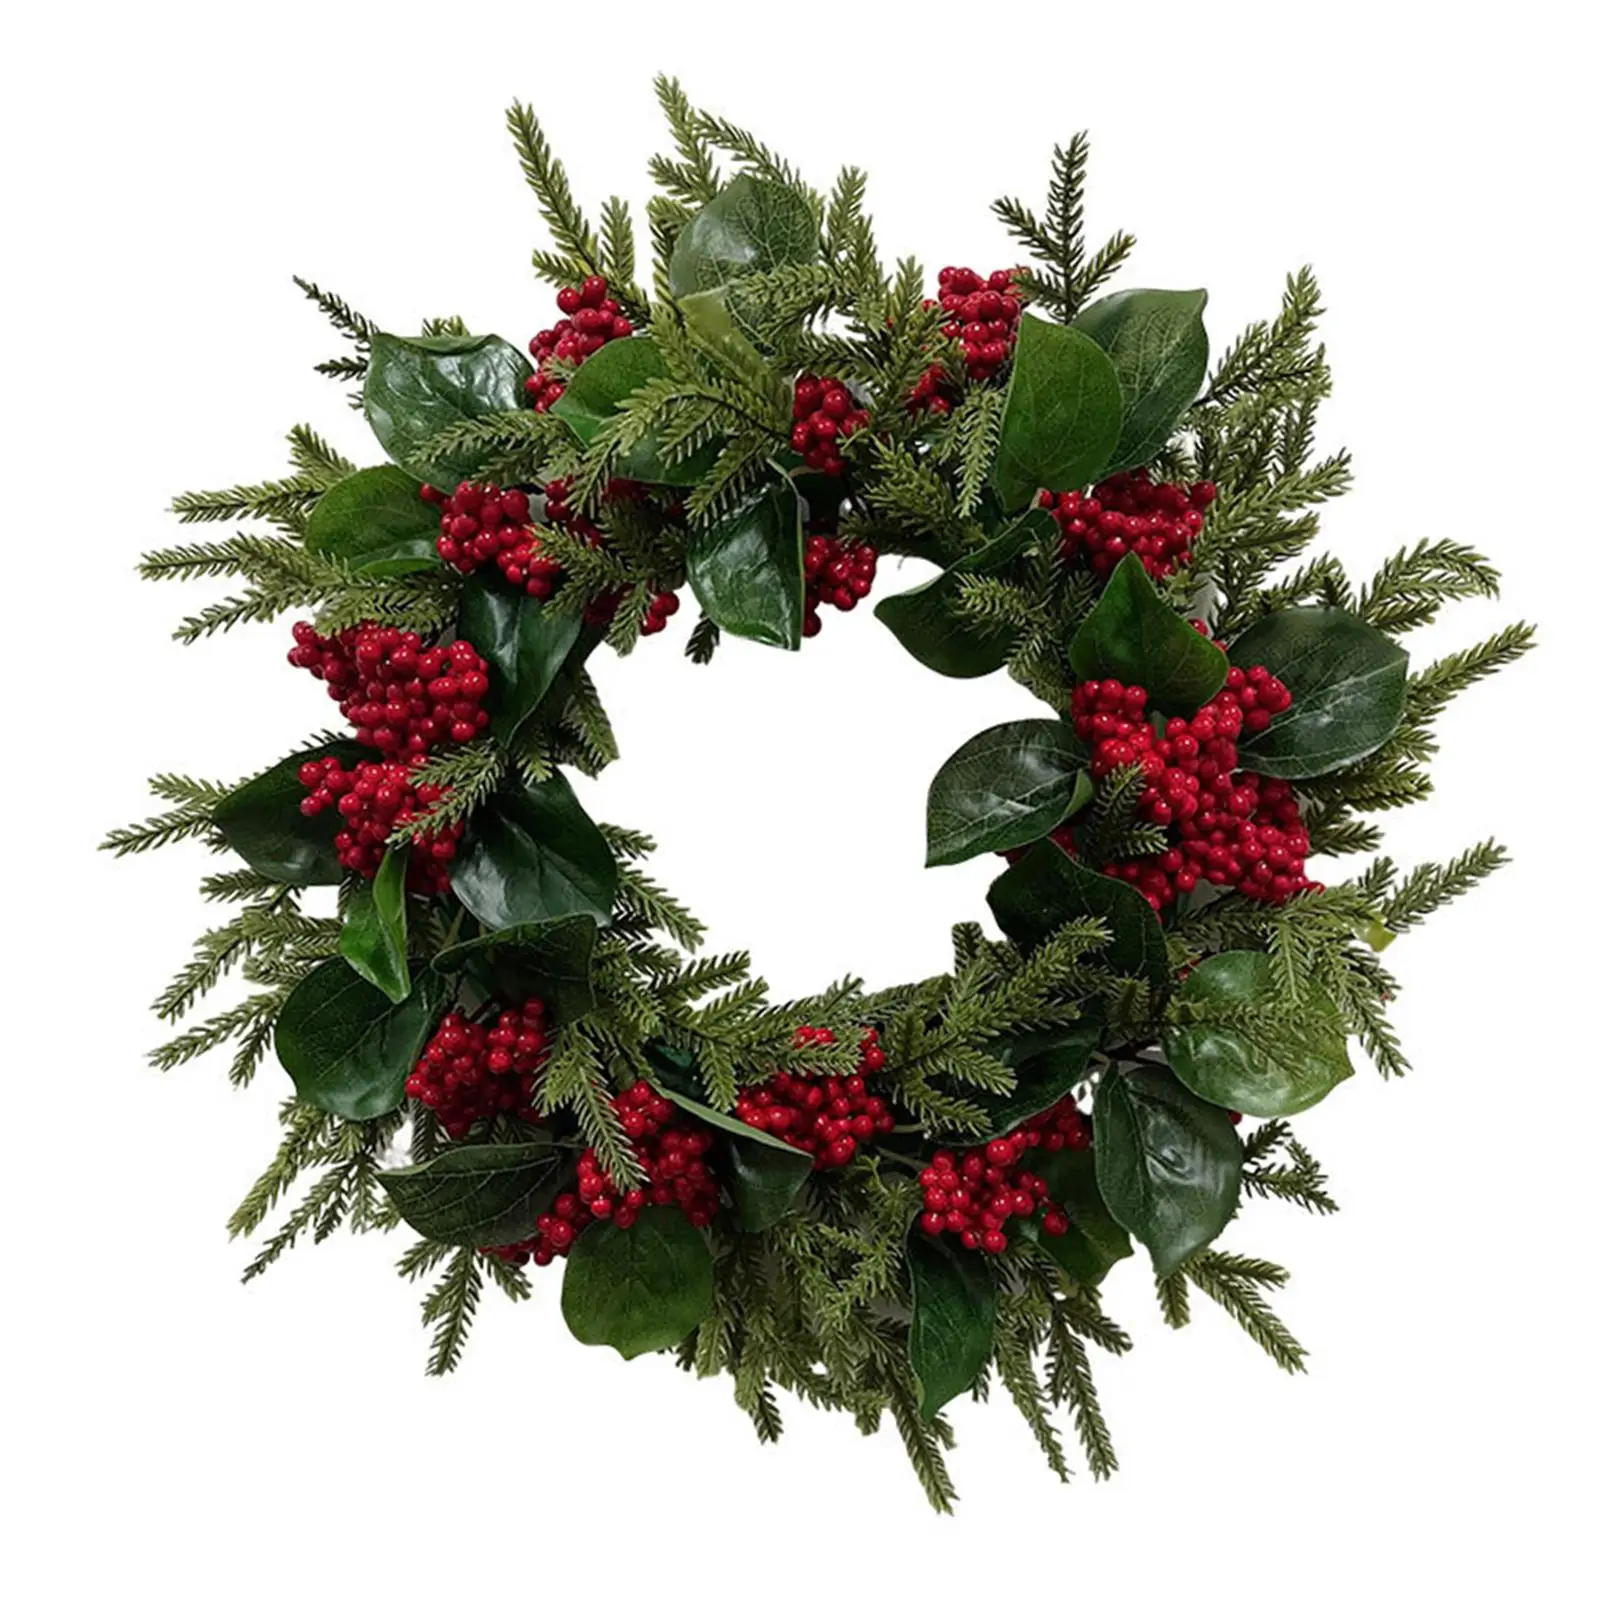 Christmas Wreath Front Door with Red Berries Home Decor Artificial Floral Wreath for New Year Farmhouse Holiday Window Outdoor